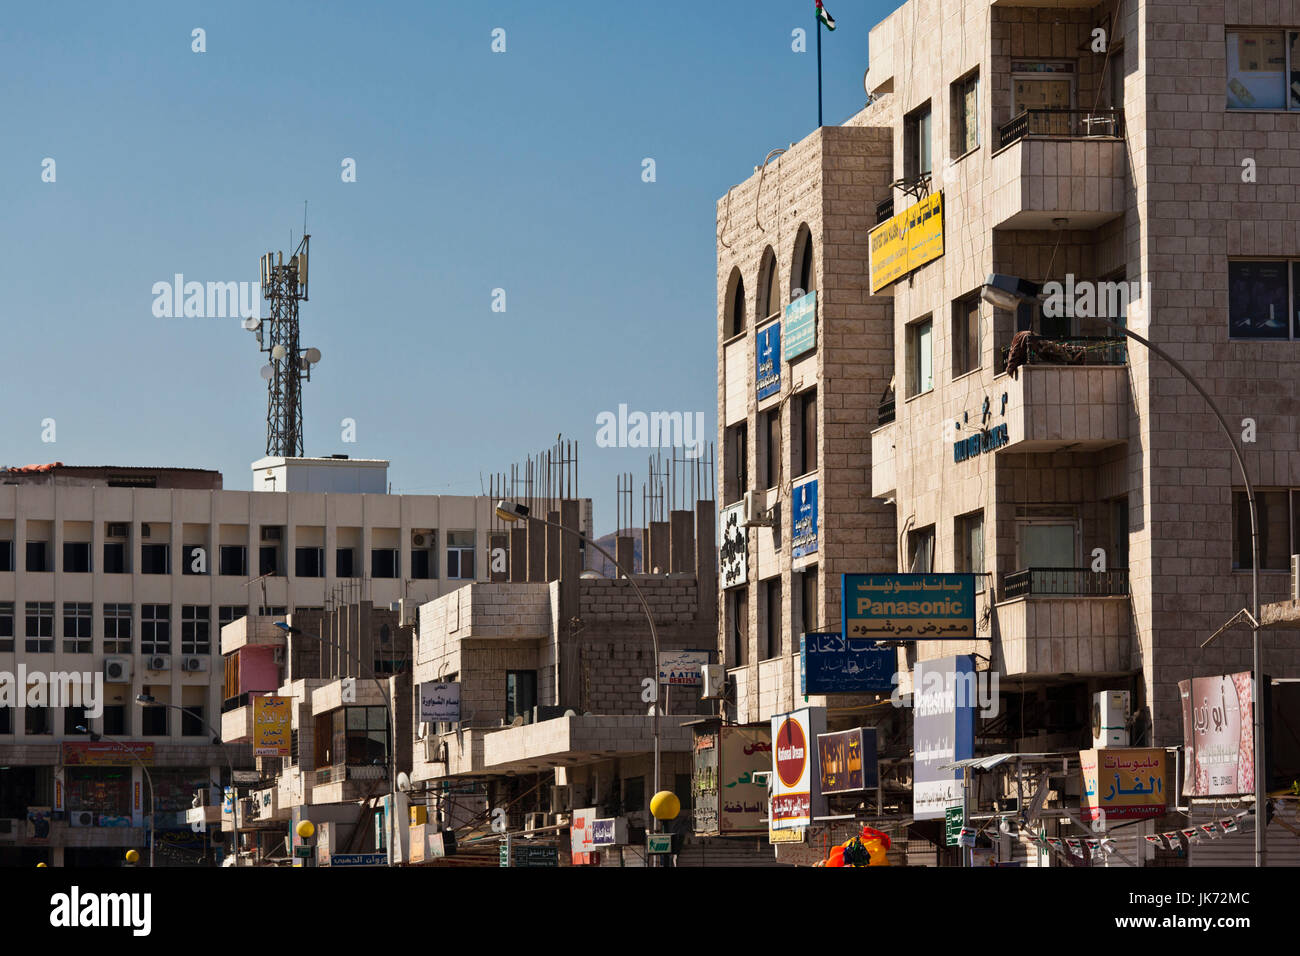 Shopping Aqaba High Resolution Stock Photography and Images Alamy